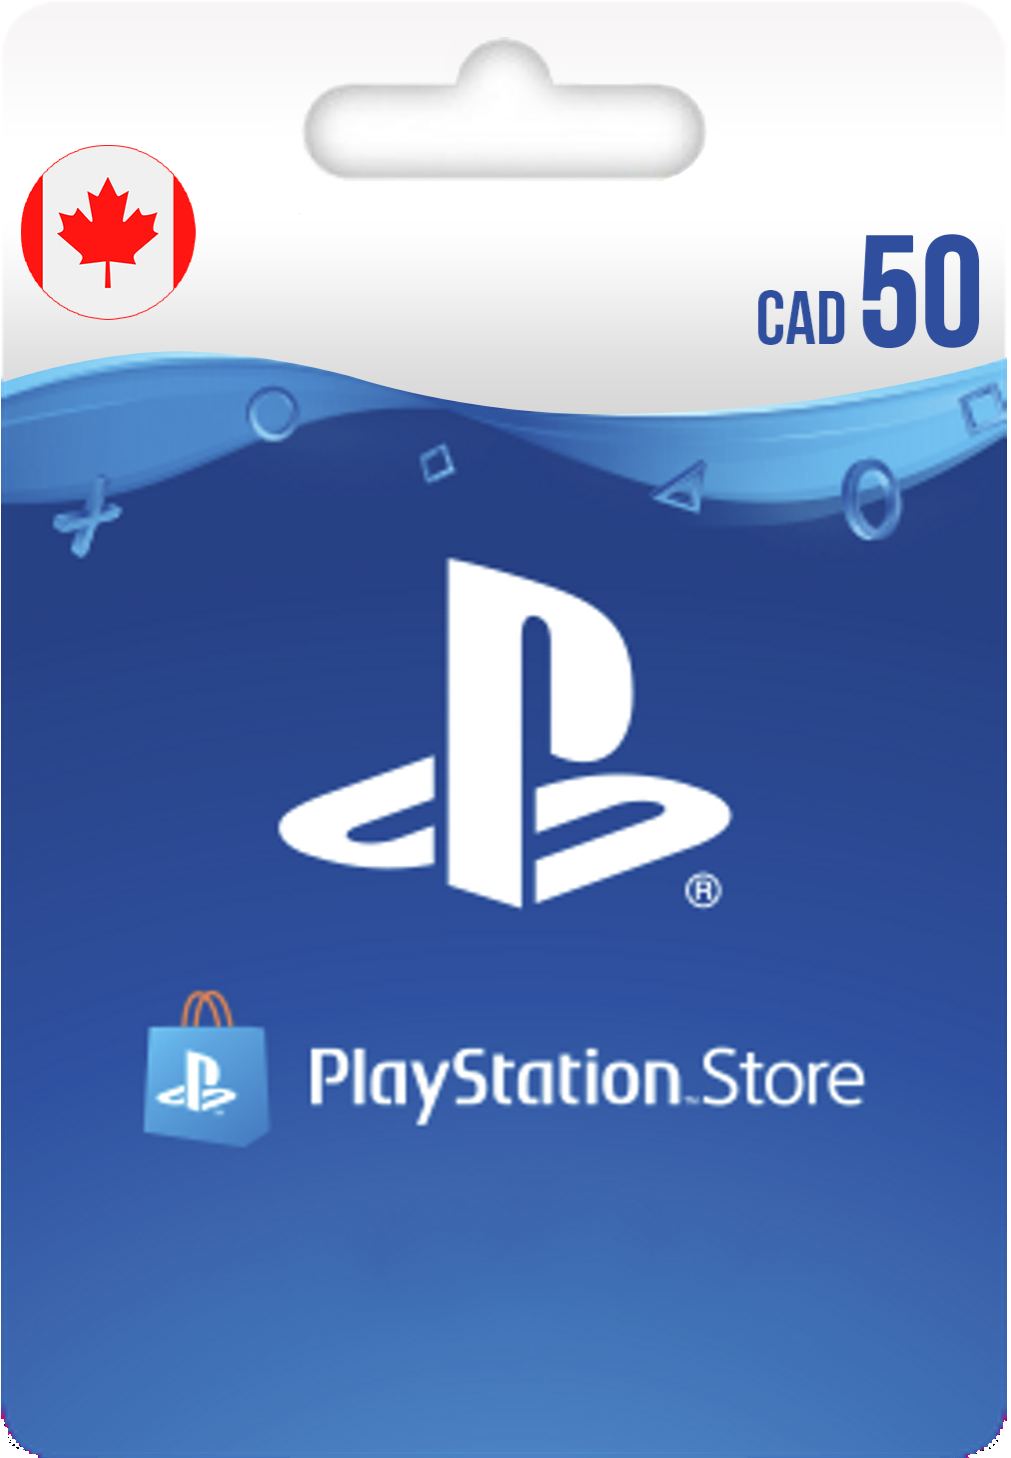 have some canada gift cards at a us store : r/MichaelsEmployees